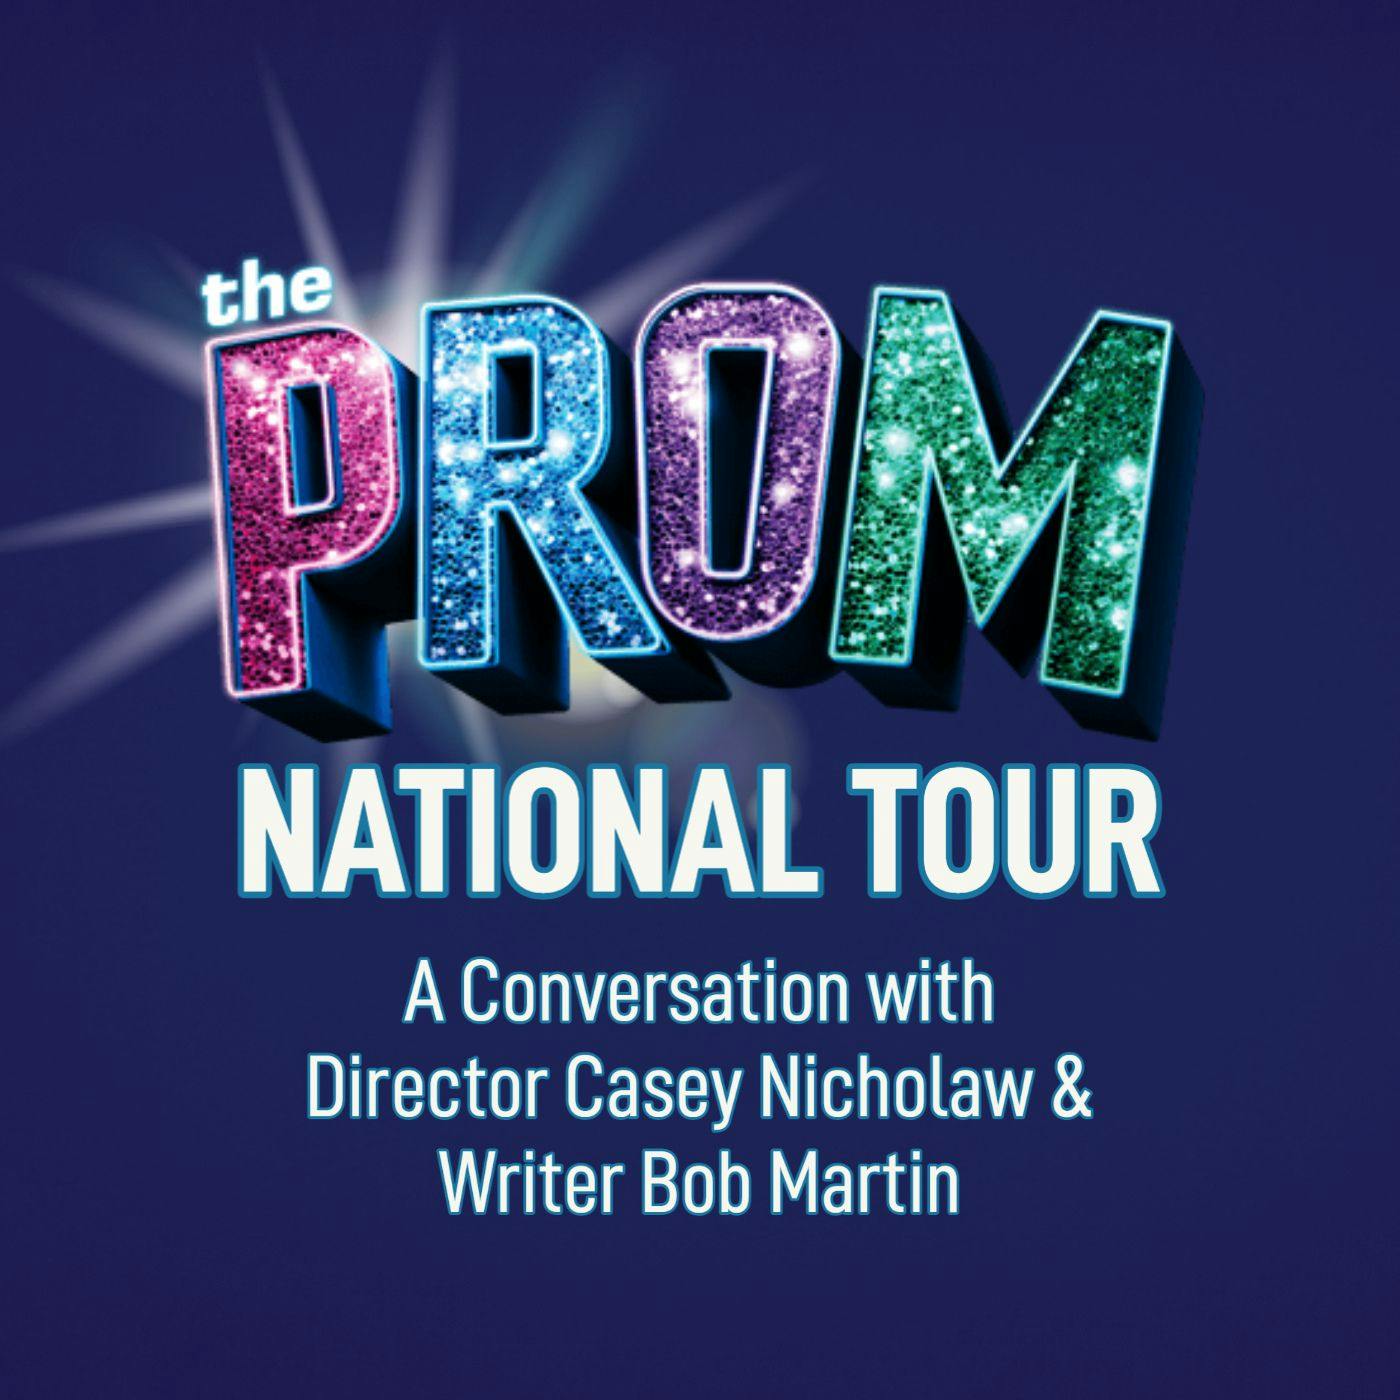 THE PROM National Tour: A Conversation with Director Casey Nicholaw & Writer Bob Martin